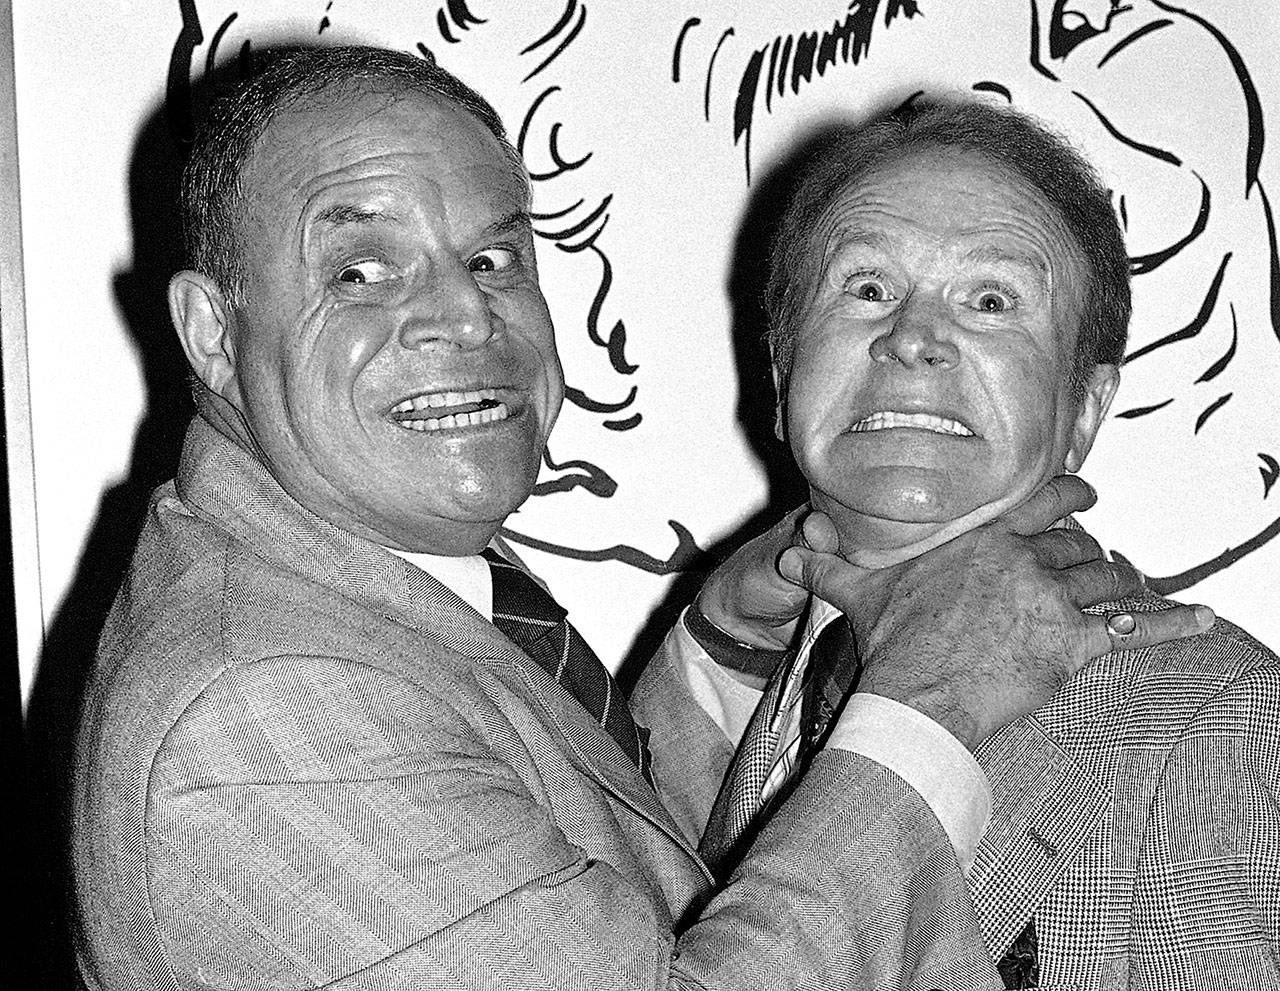 In this Nov. 10, 1977 photo, comedian Don Rickles (left) pretends to strangle fellow comedian Red Buttons prior to an Annual Stag Roast in Los Angeles. (AP Photo/ Lennox McLendon, File)